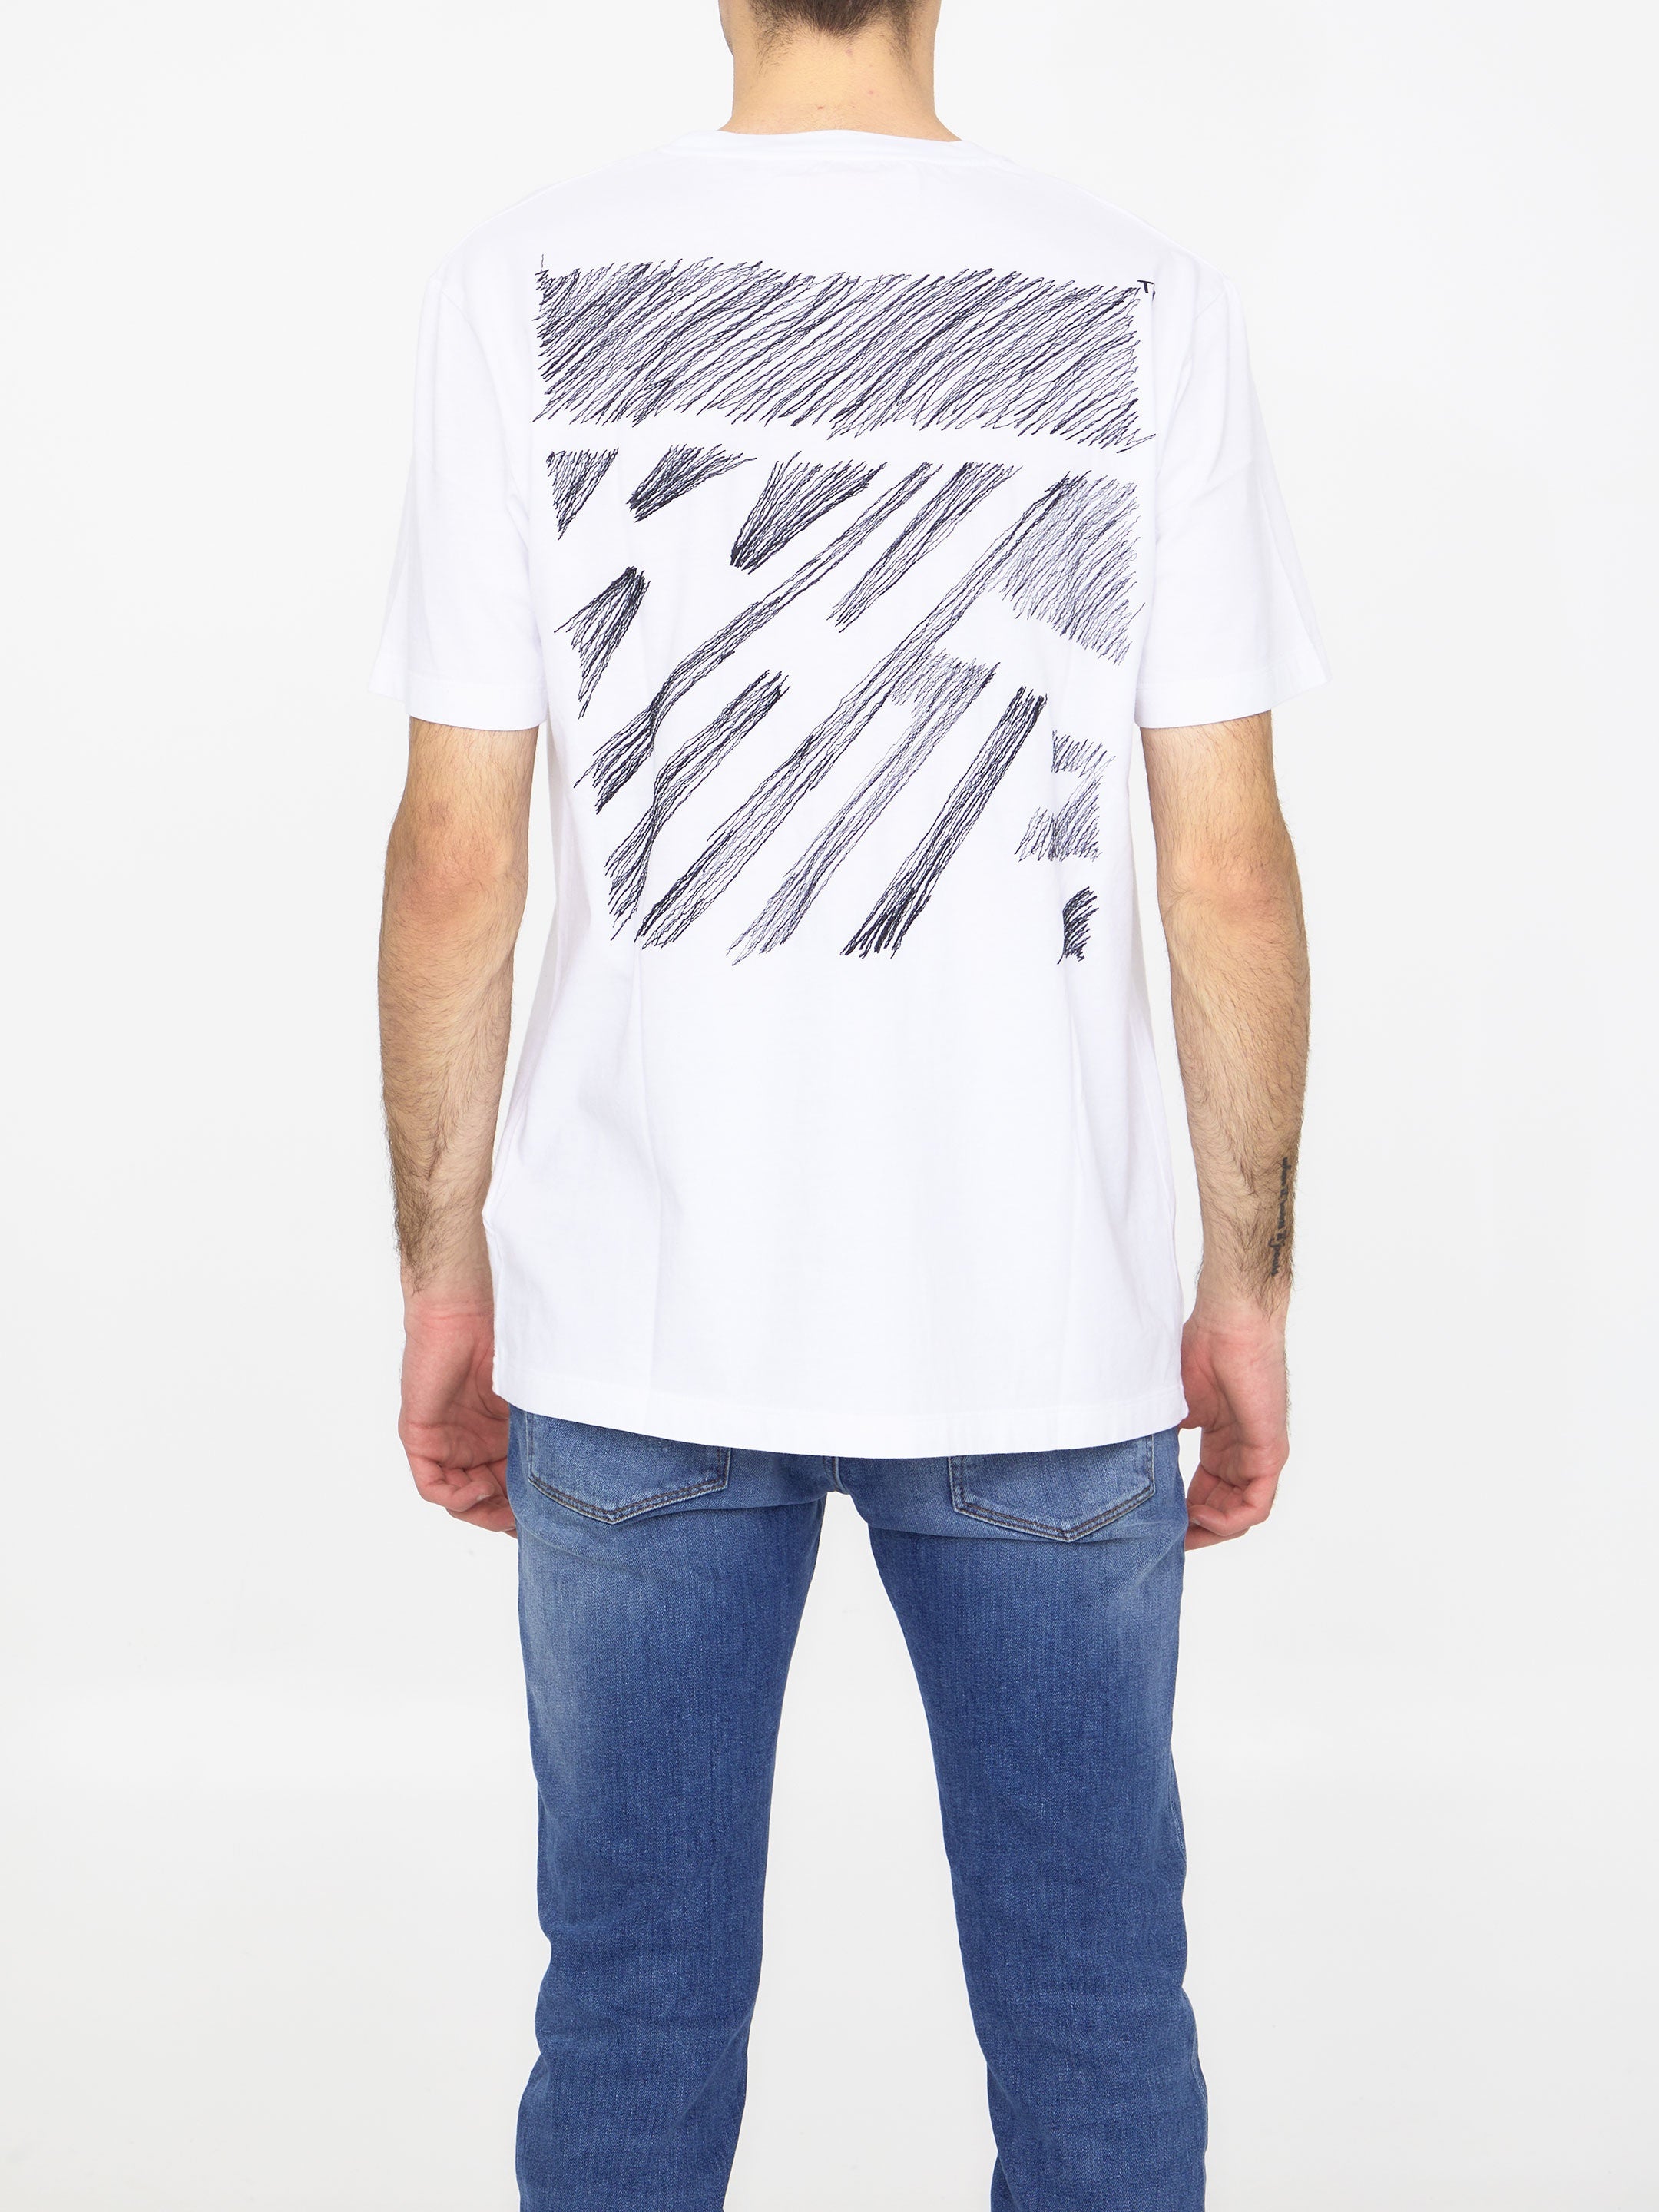 OFF-WHITE-OUTLET-SALE-Scribble-Diagonal-t-shirt-Shirts-S-WHITE-ARCHIVE-COLLECTION-4.jpg